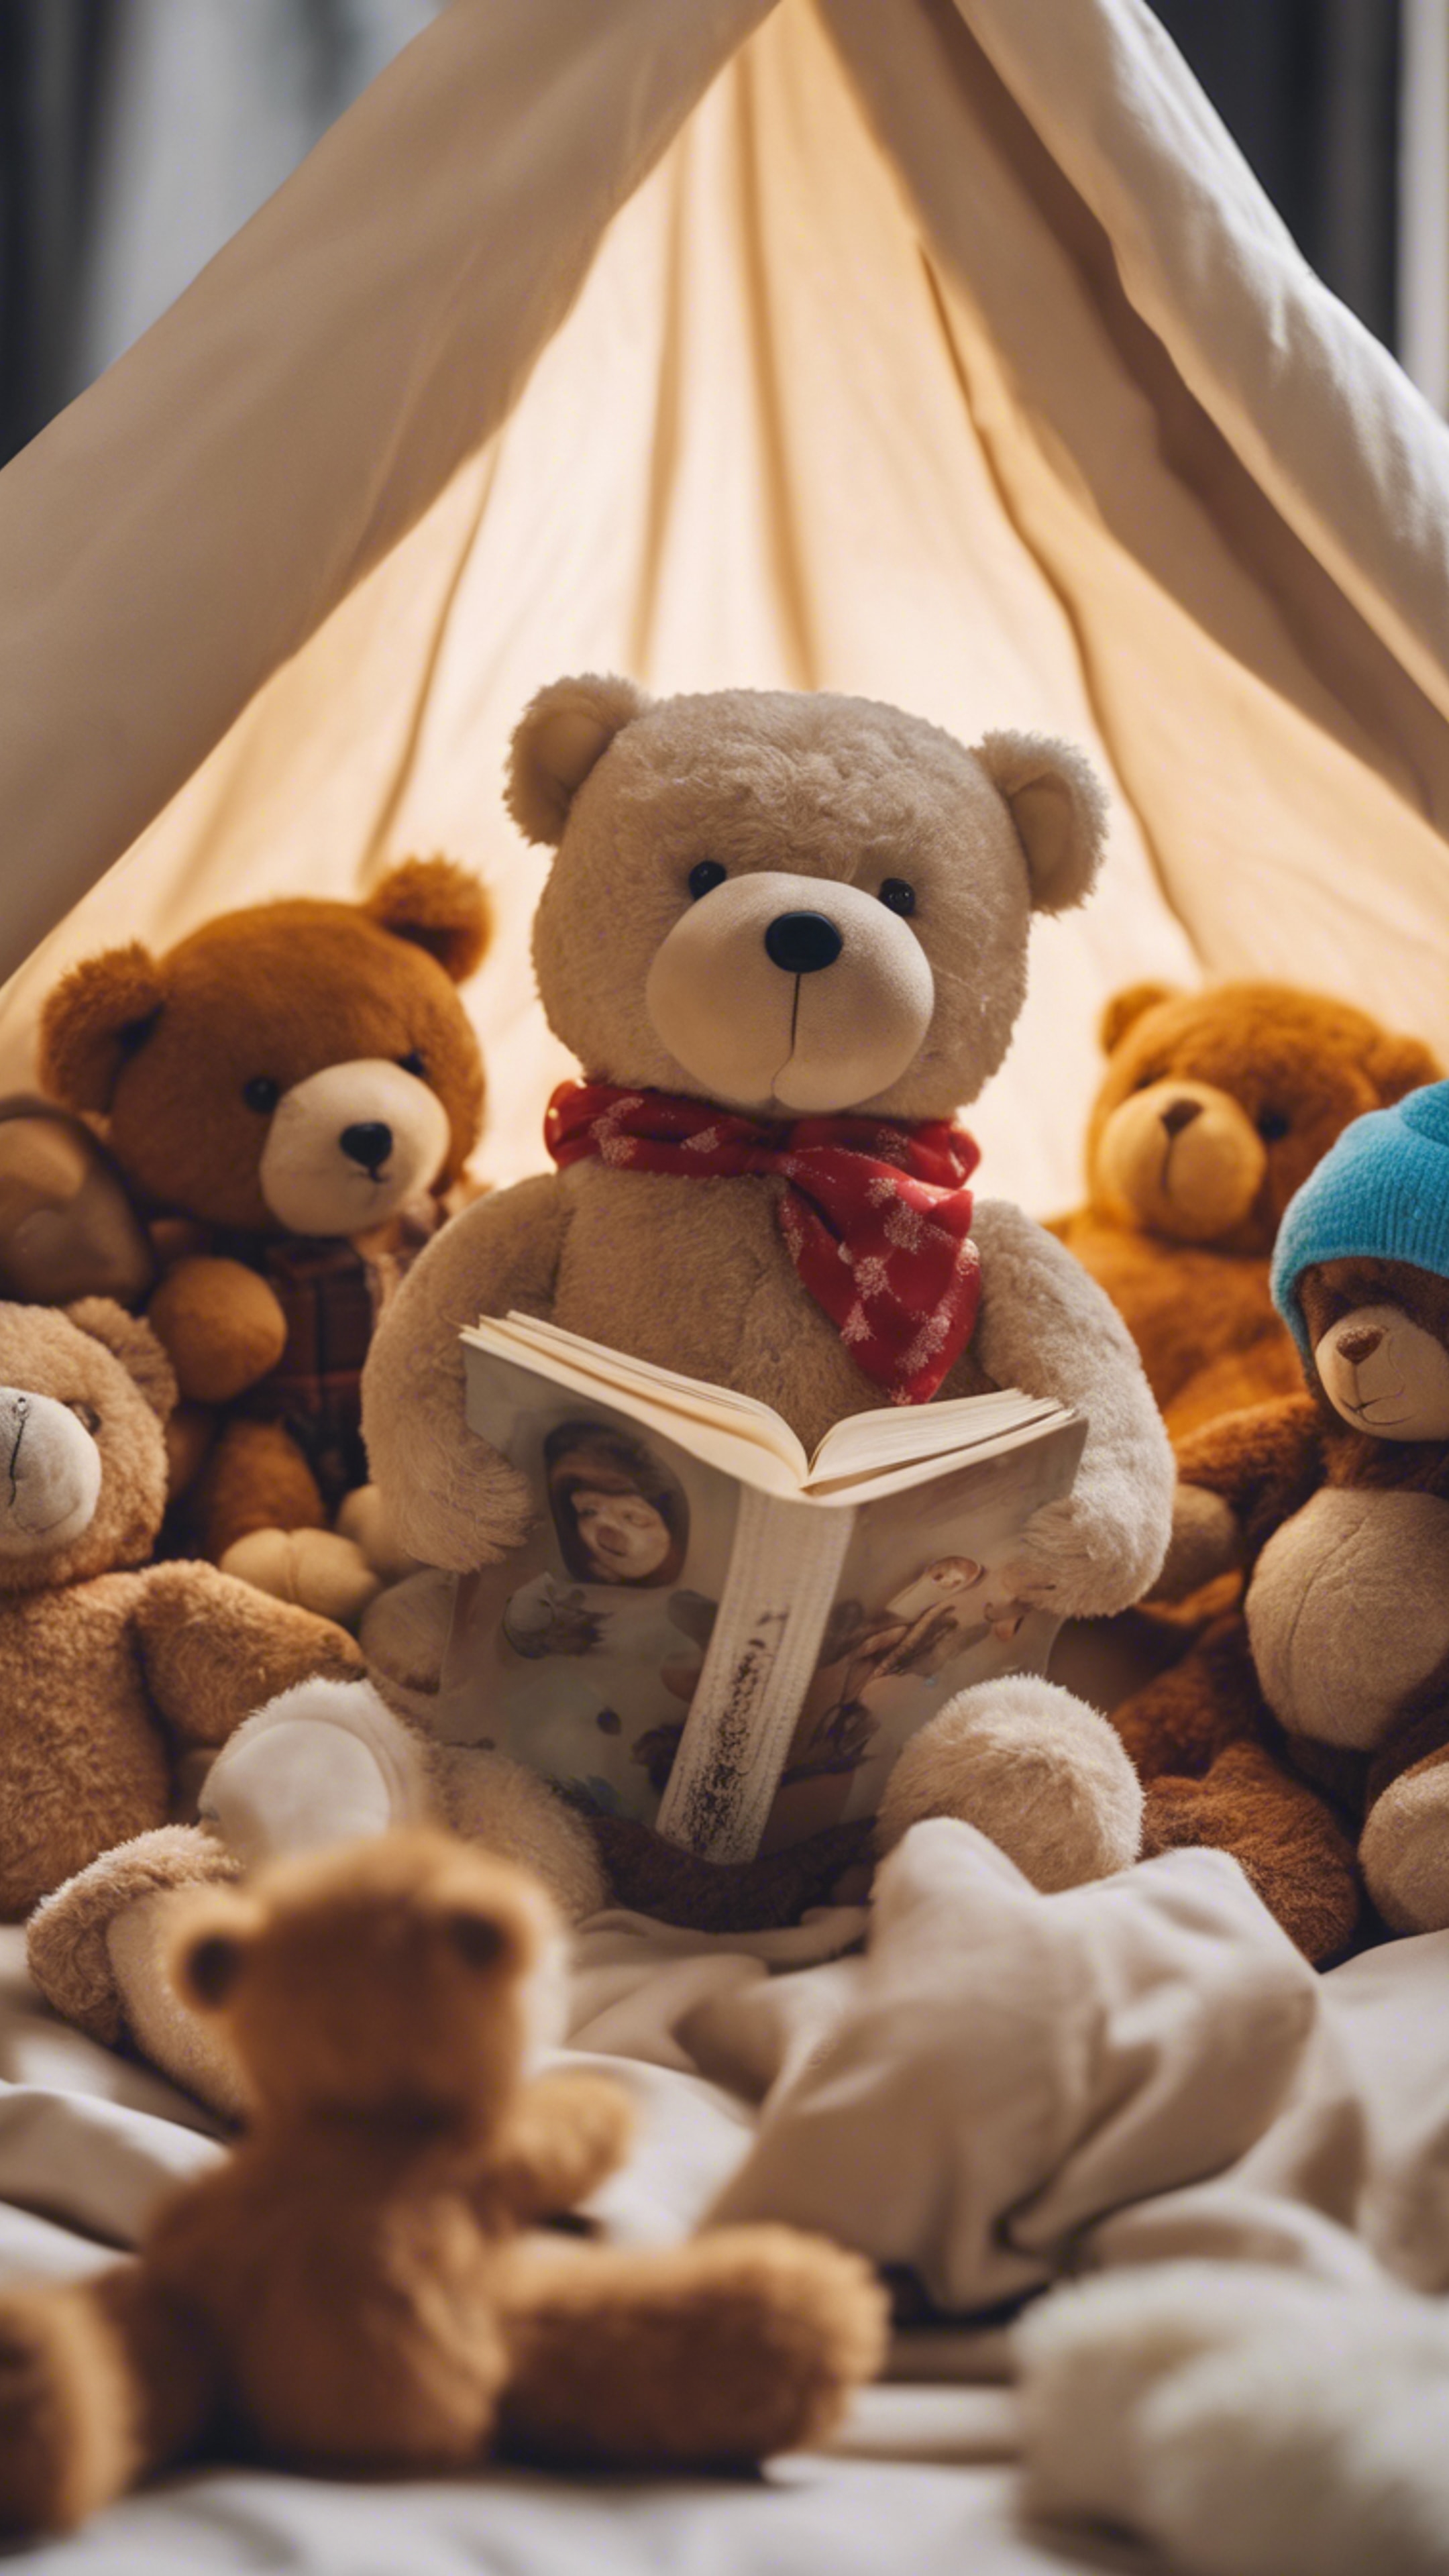 A teddy bear reading a story to a group of animal toys under a blanket fort. Papel de parede[8c29e330caea492dba8f]